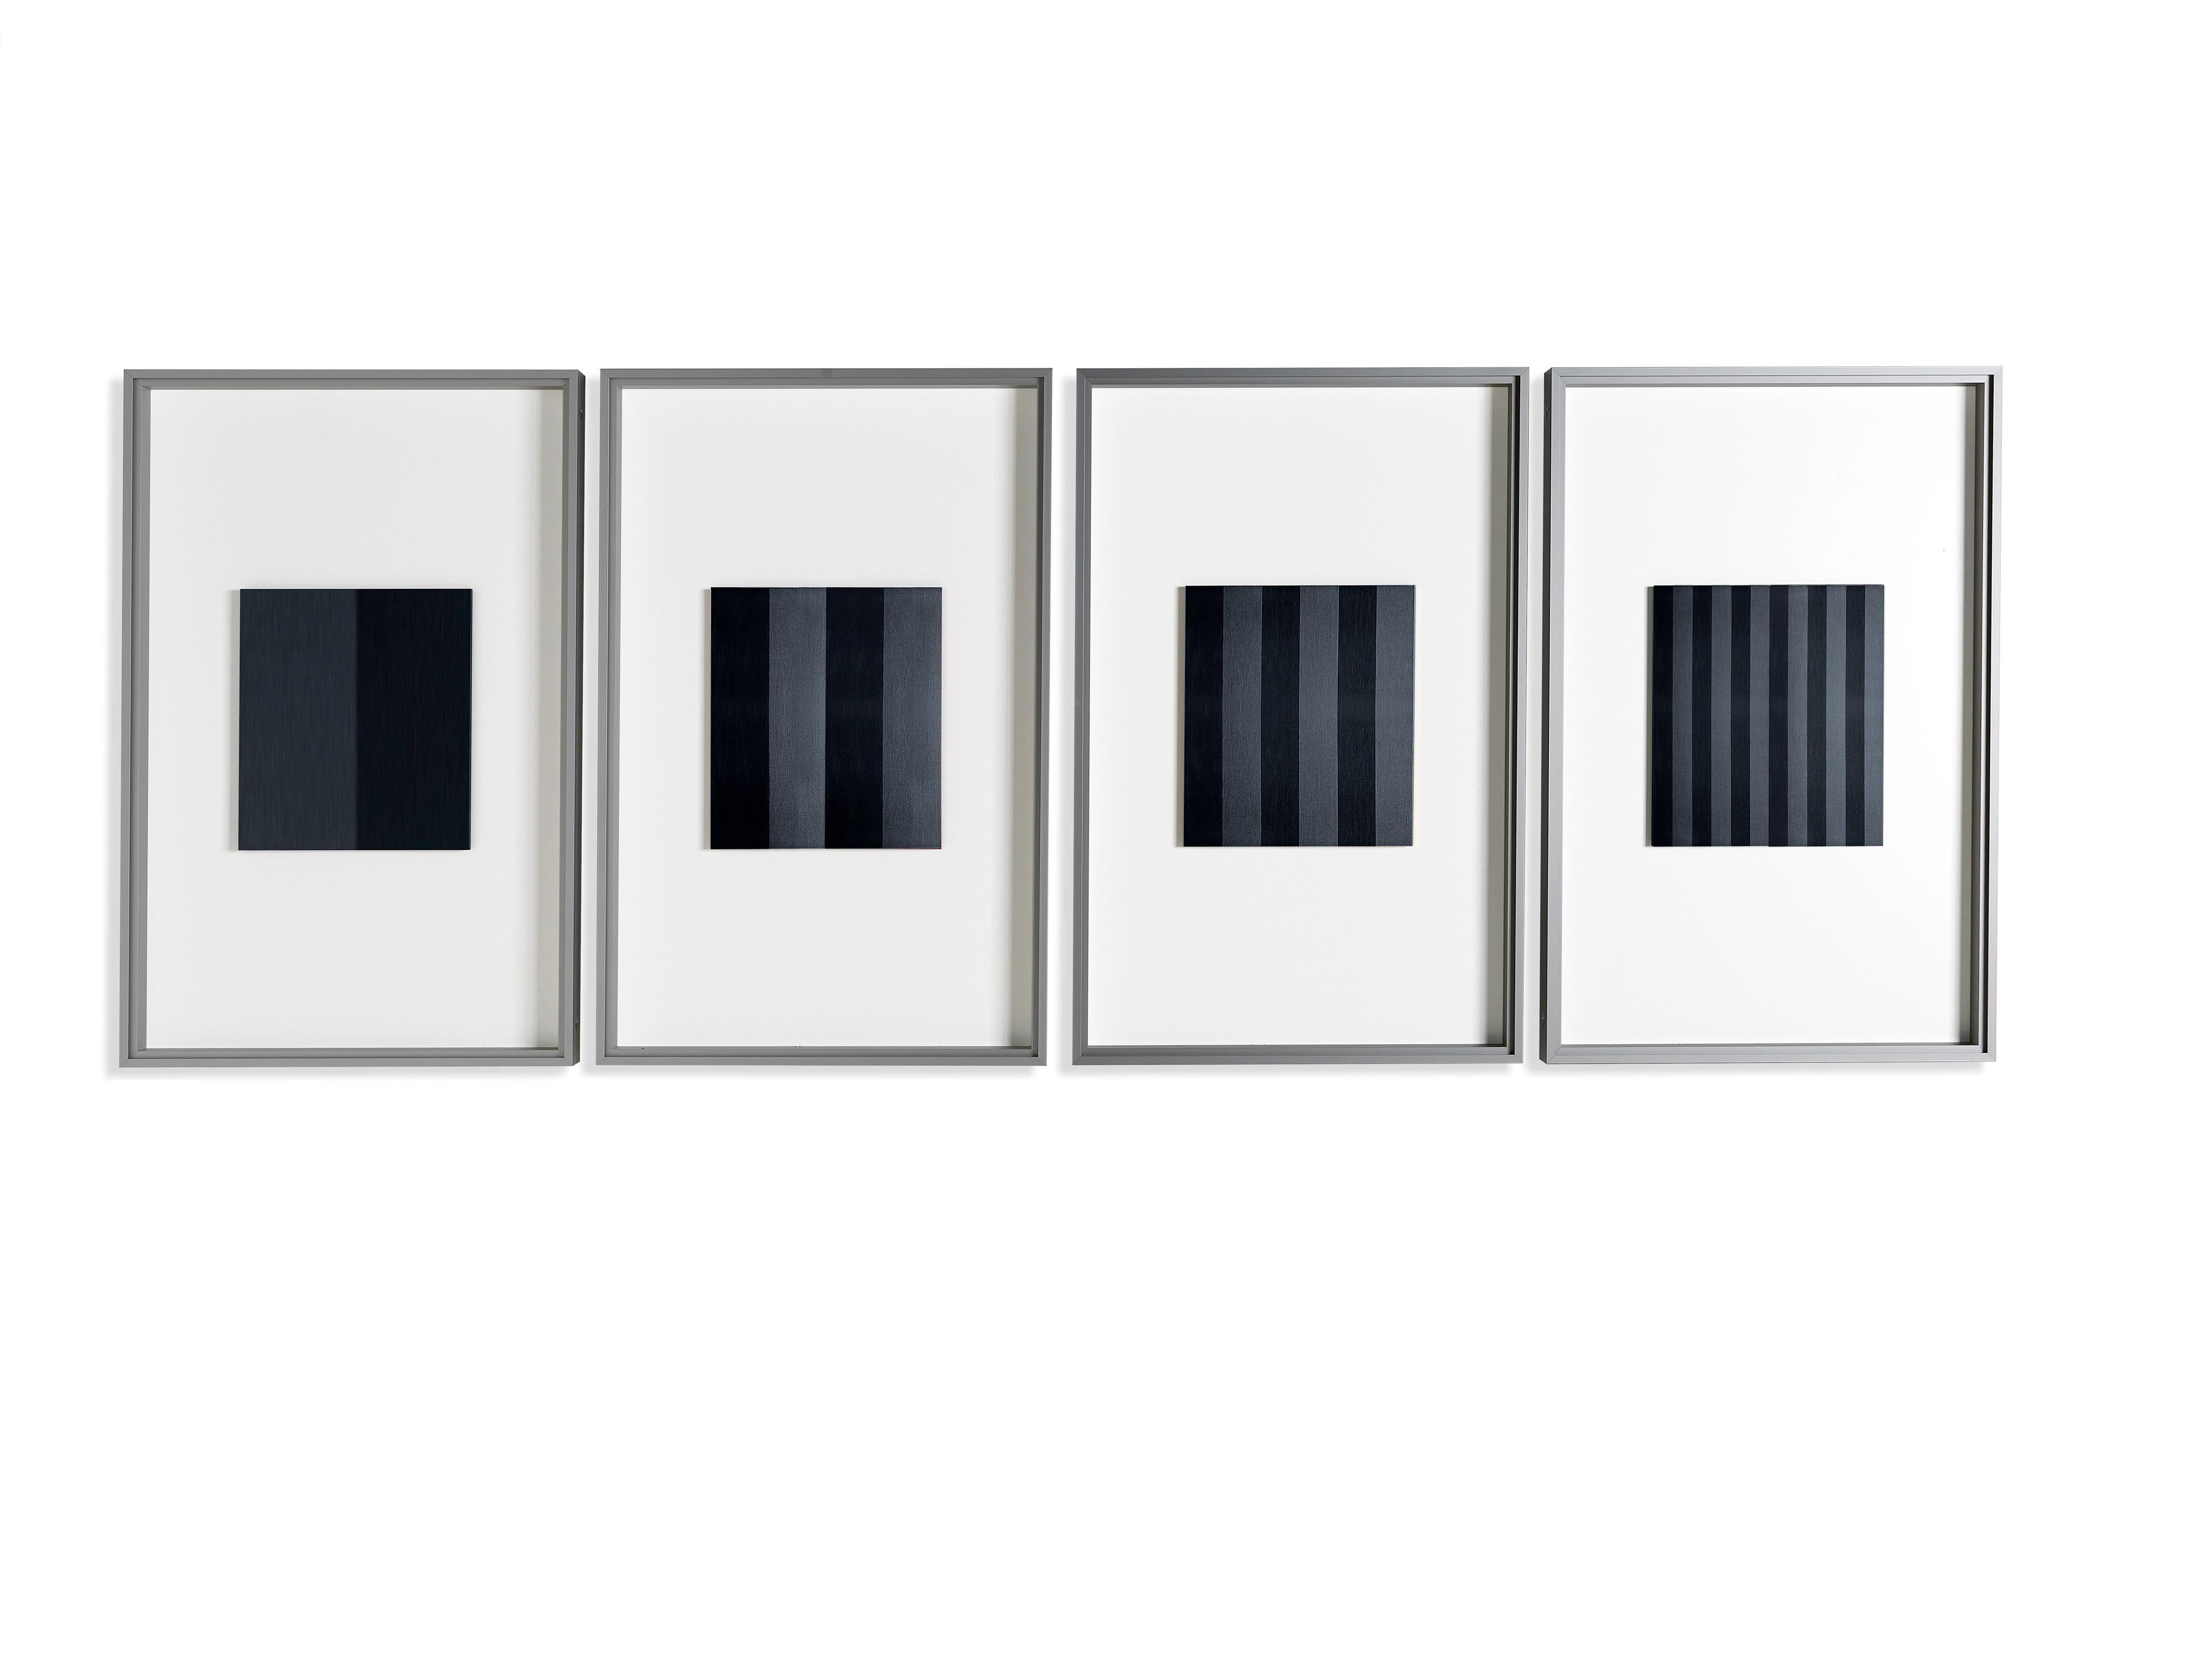 Keiji Takeuchi  Phenomena, Black 1

Limited first edition of 20 pieces in aluminium frame with ultra clear glass.

Blocks of solid anodized aluminum are CNC-milled at different frequencies to create subtly angled panels that reflect light in black